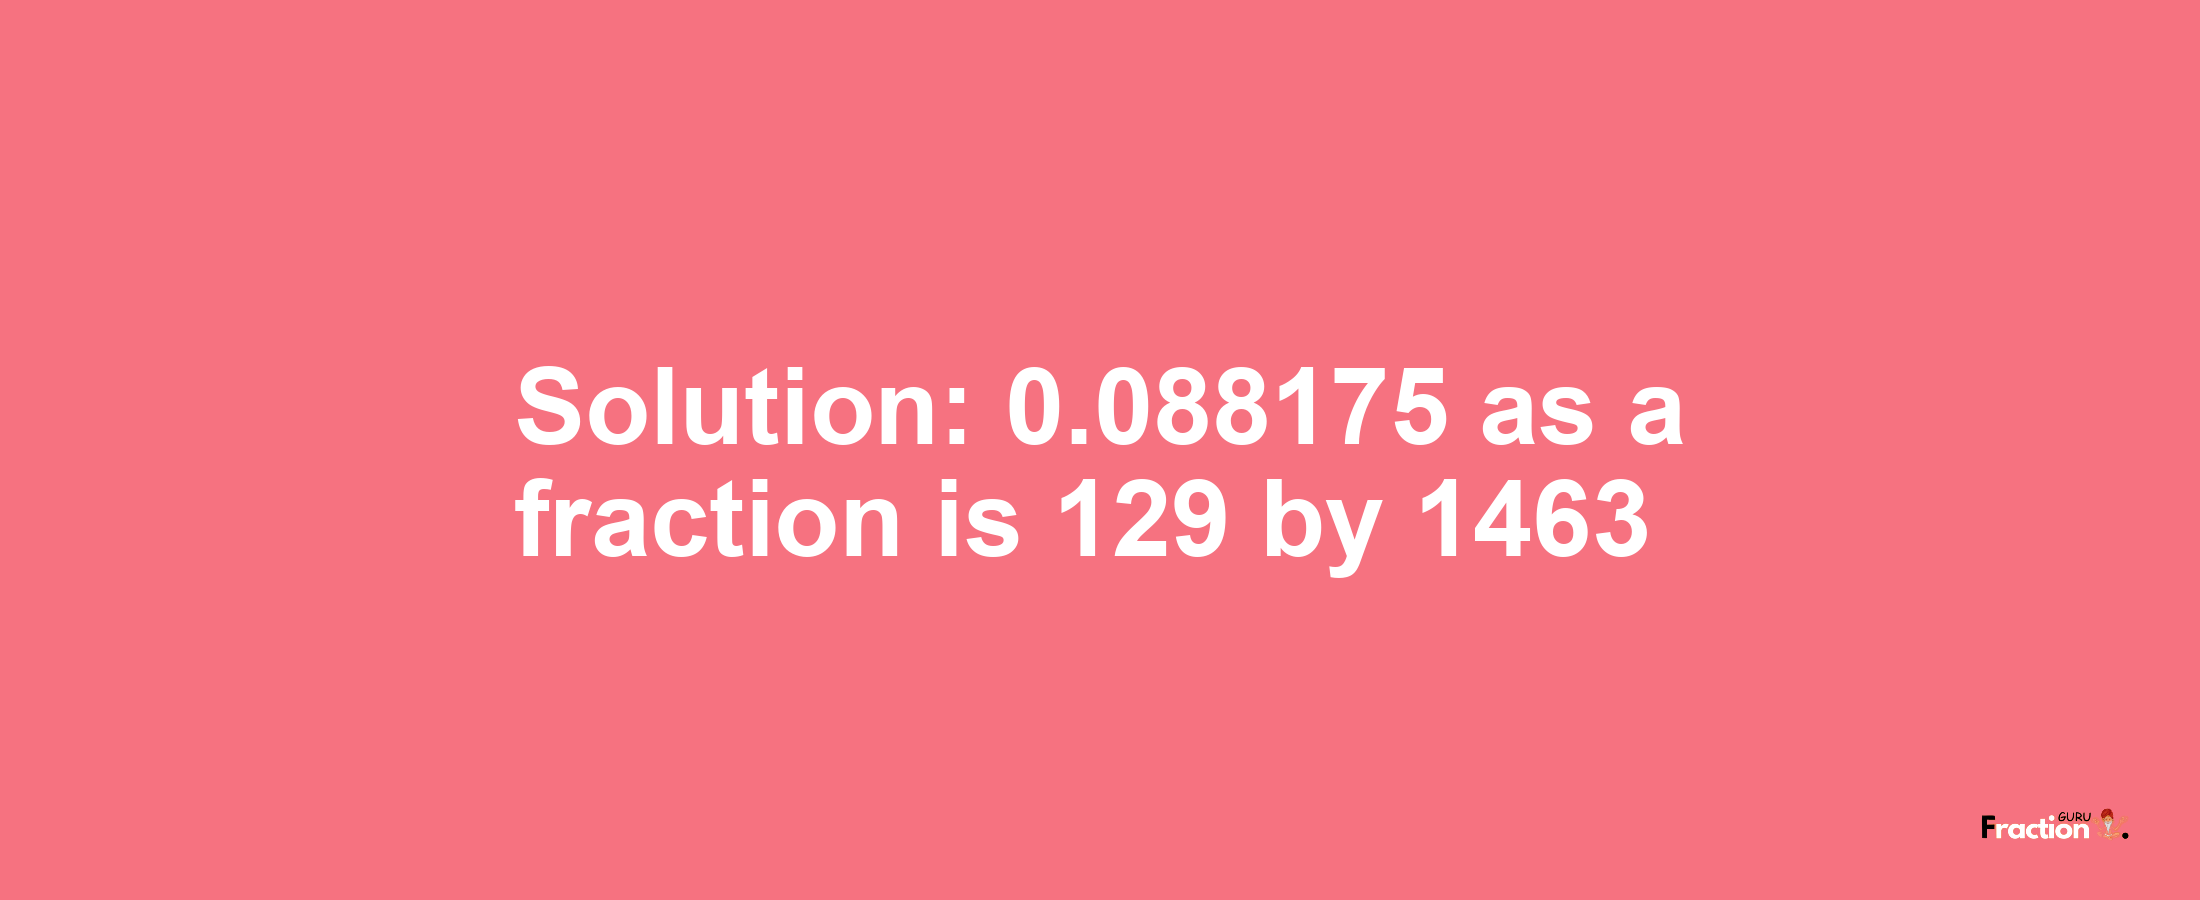 Solution:0.088175 as a fraction is 129/1463